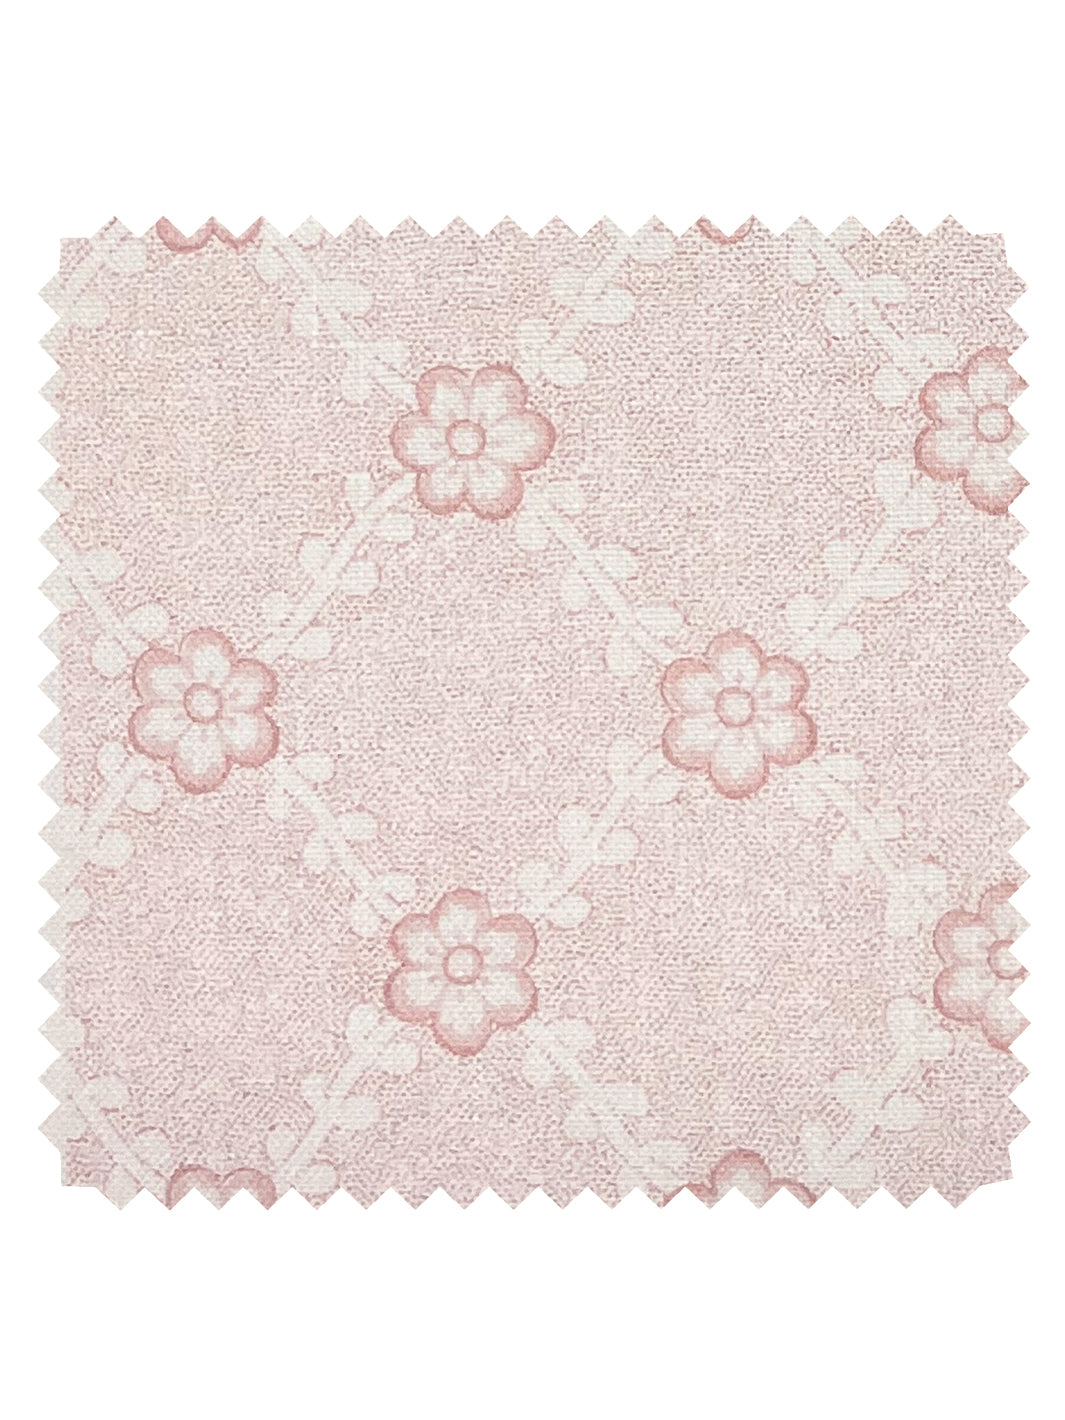 'Lucia' Linen Fabric by Nathan Turner - Pink